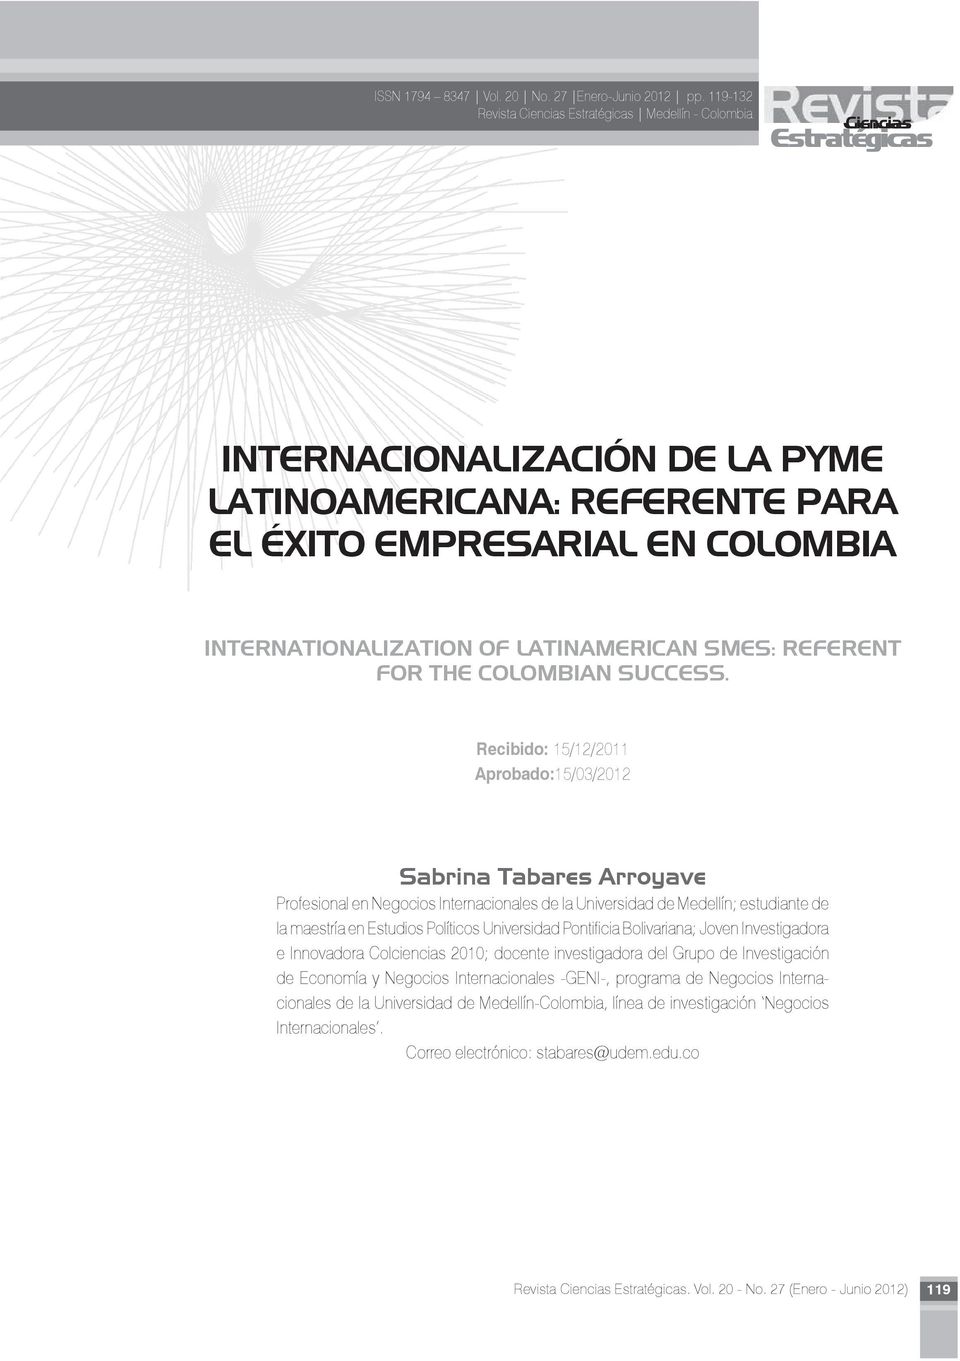 COLOMBIA INTERNATIONALIZATION OF LATINAMERICAN SMES: REFERENT FOR THE COLOMBIAN SUCCESS.